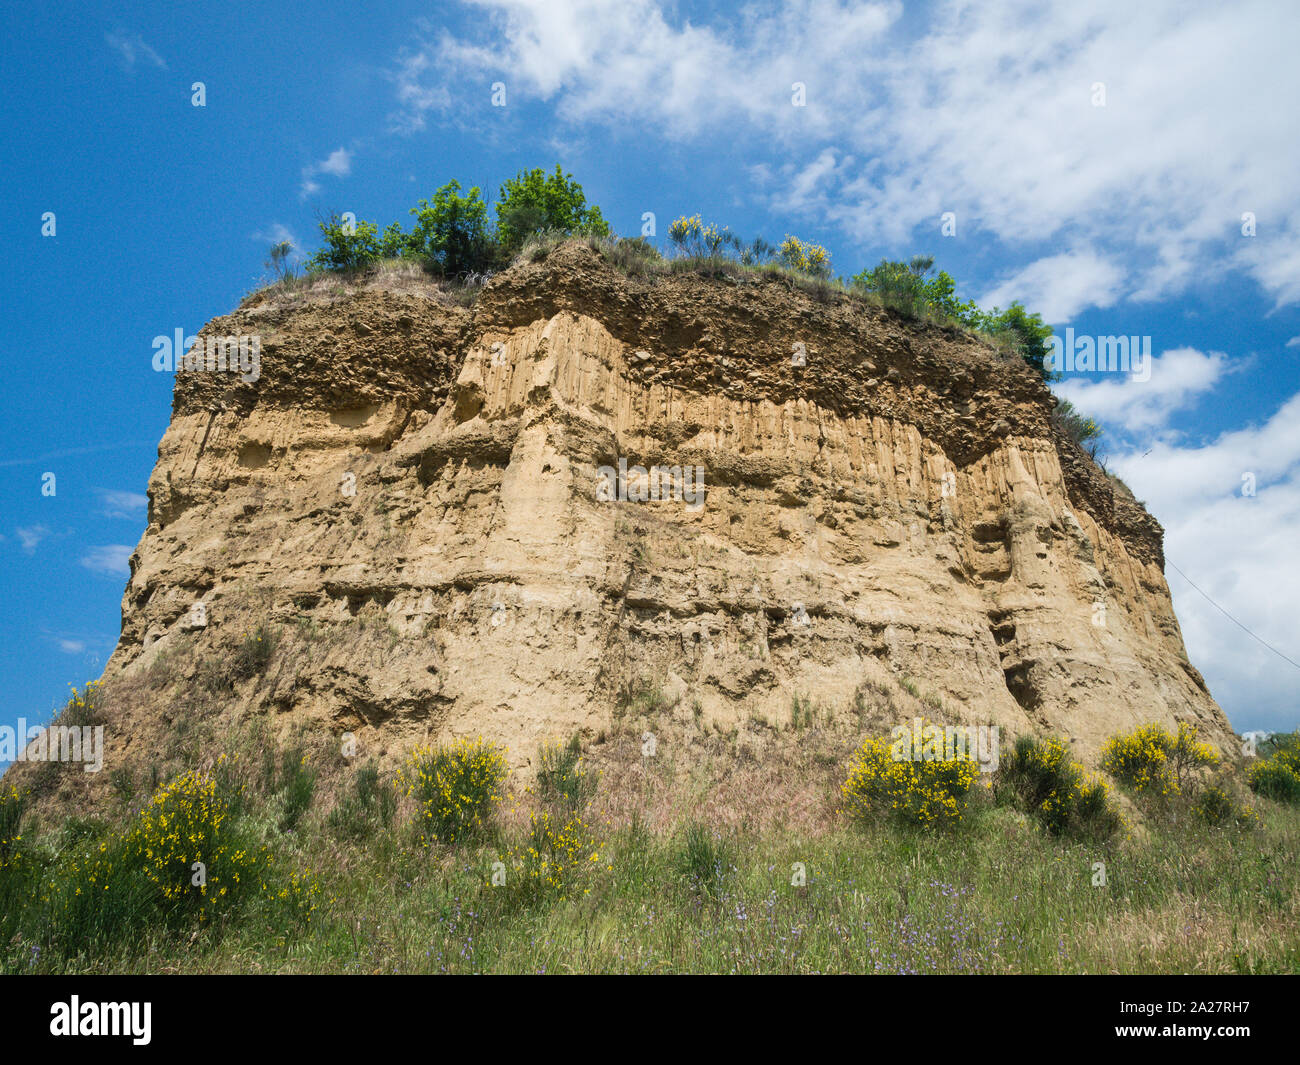 View of Le Balze canyon landscape in Valdarno, Italy Stock Photo